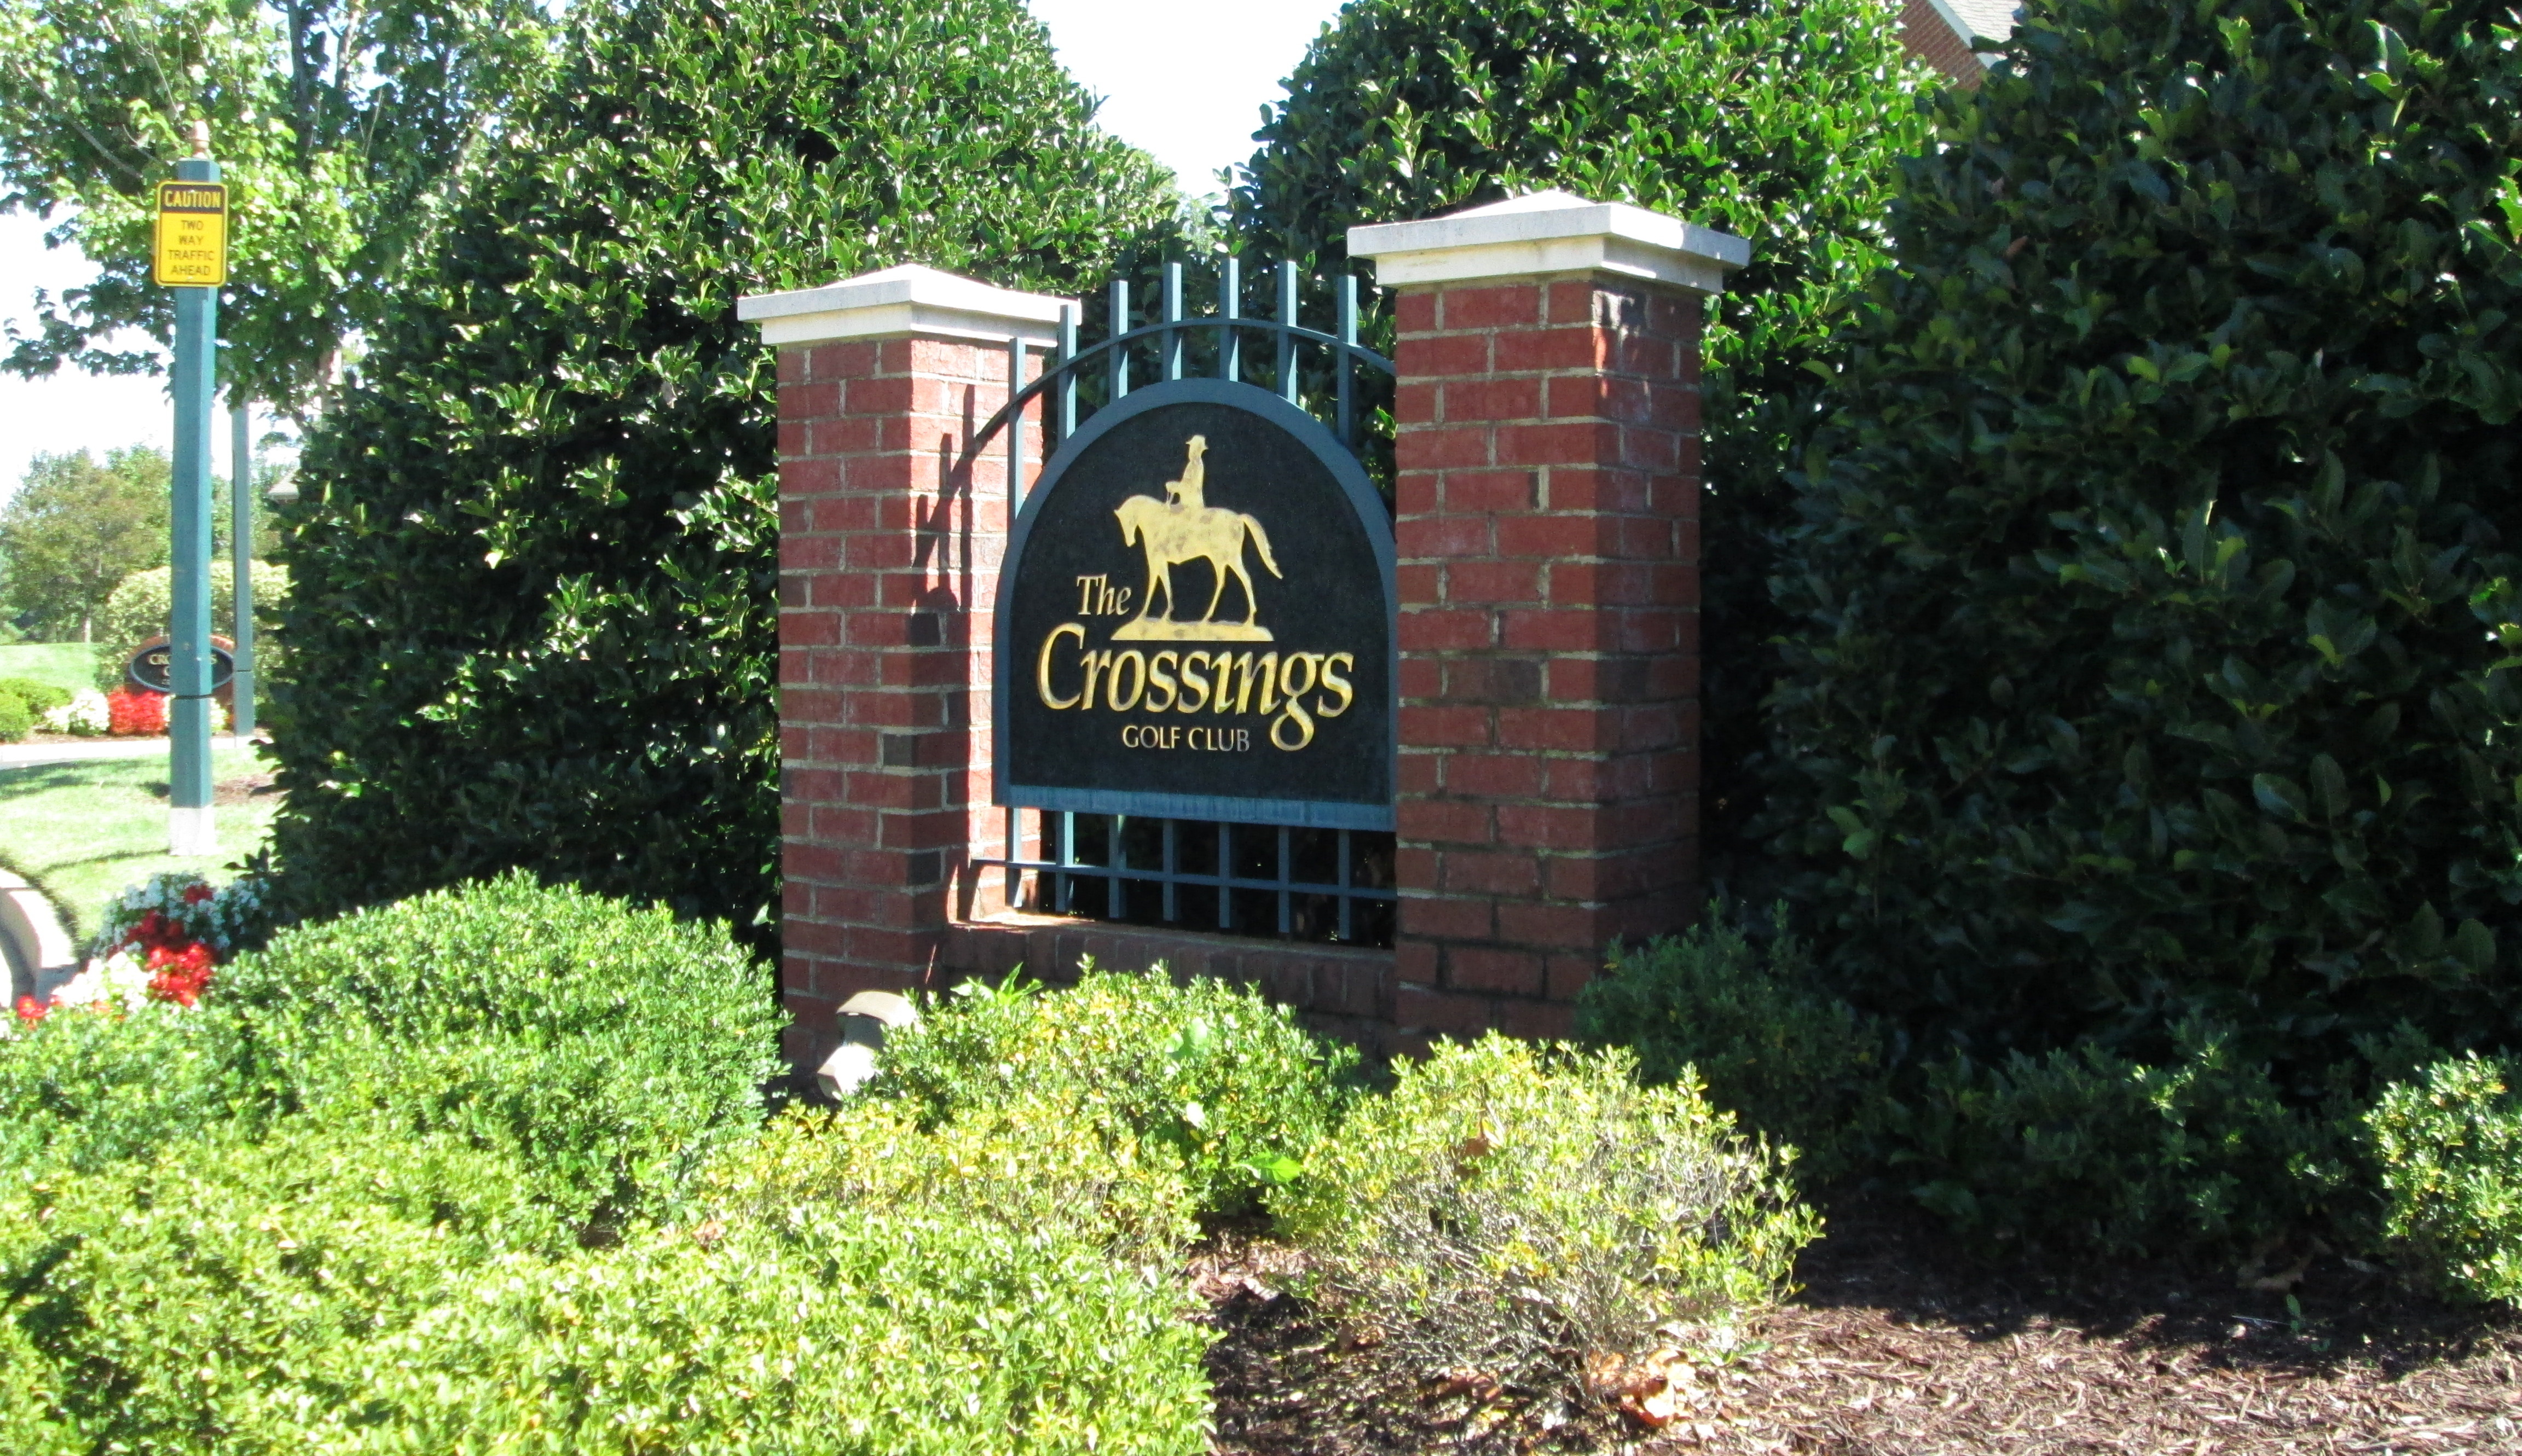 The Crossings golf course was purchased for $1.75 million. (Michael Schwartz)